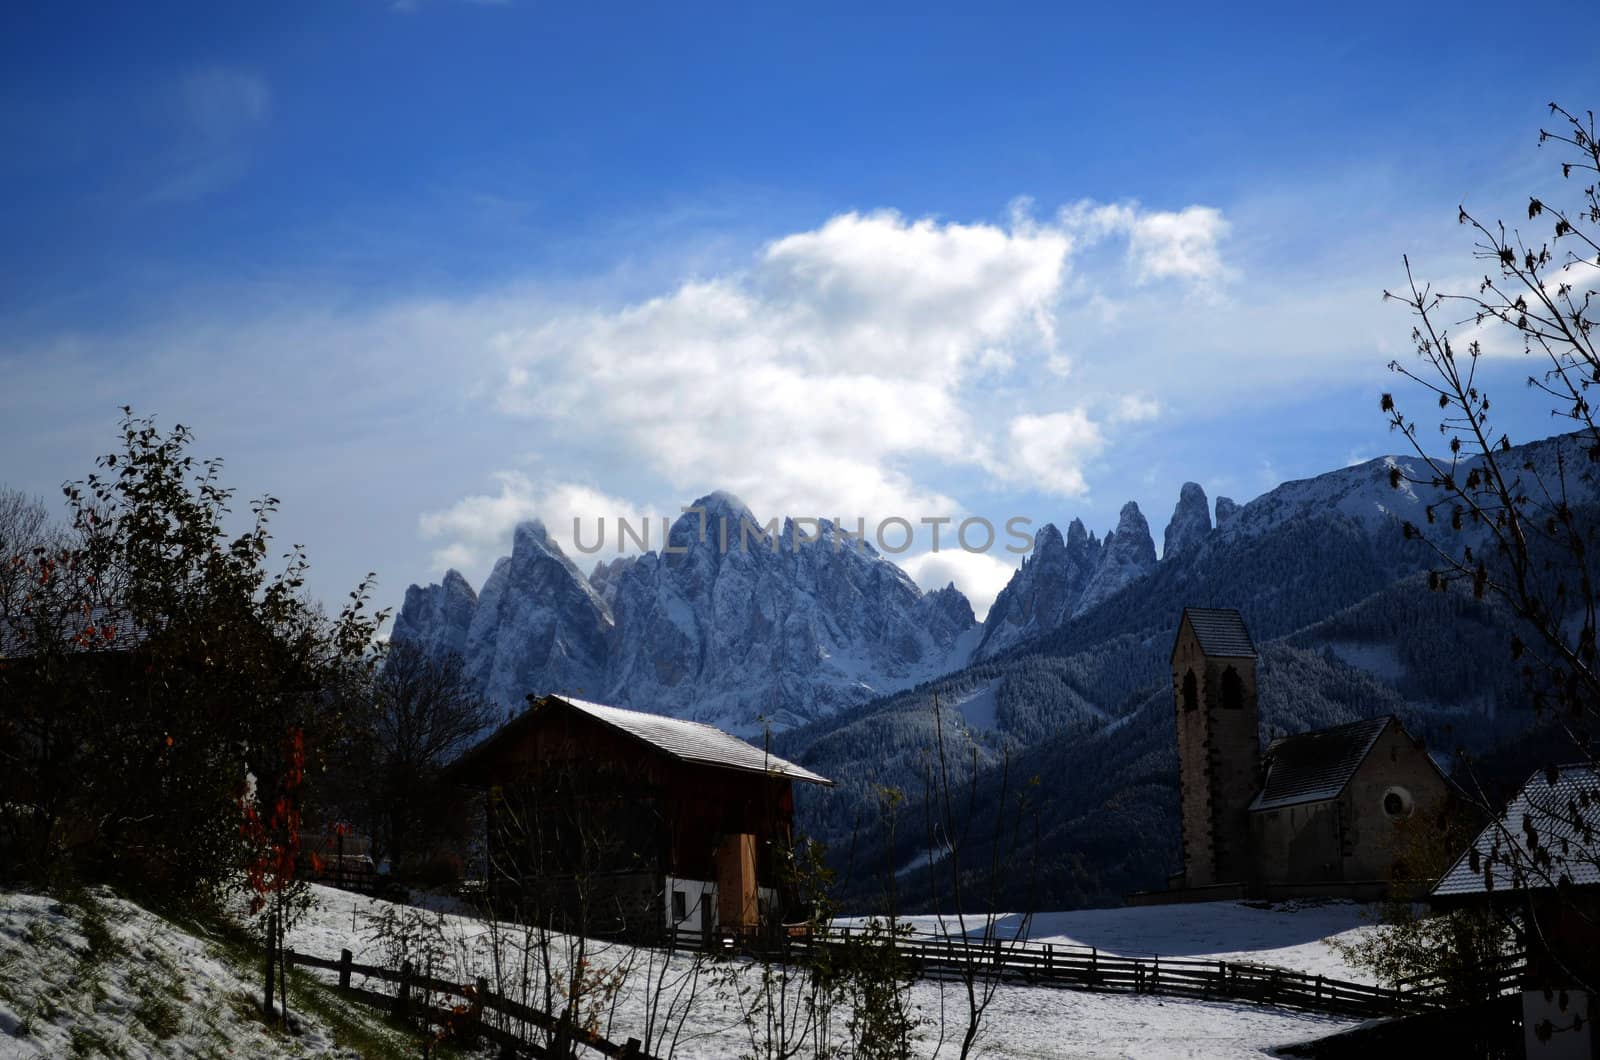 The mountain village and church of St. Jakob (San Giacomo) near St. Magdalena (Santa Maddalena) in the Villnosstal (Val di Funes) in South Tyrol in Italy in winter with in the background the Geisler (Odle) dolomites group.